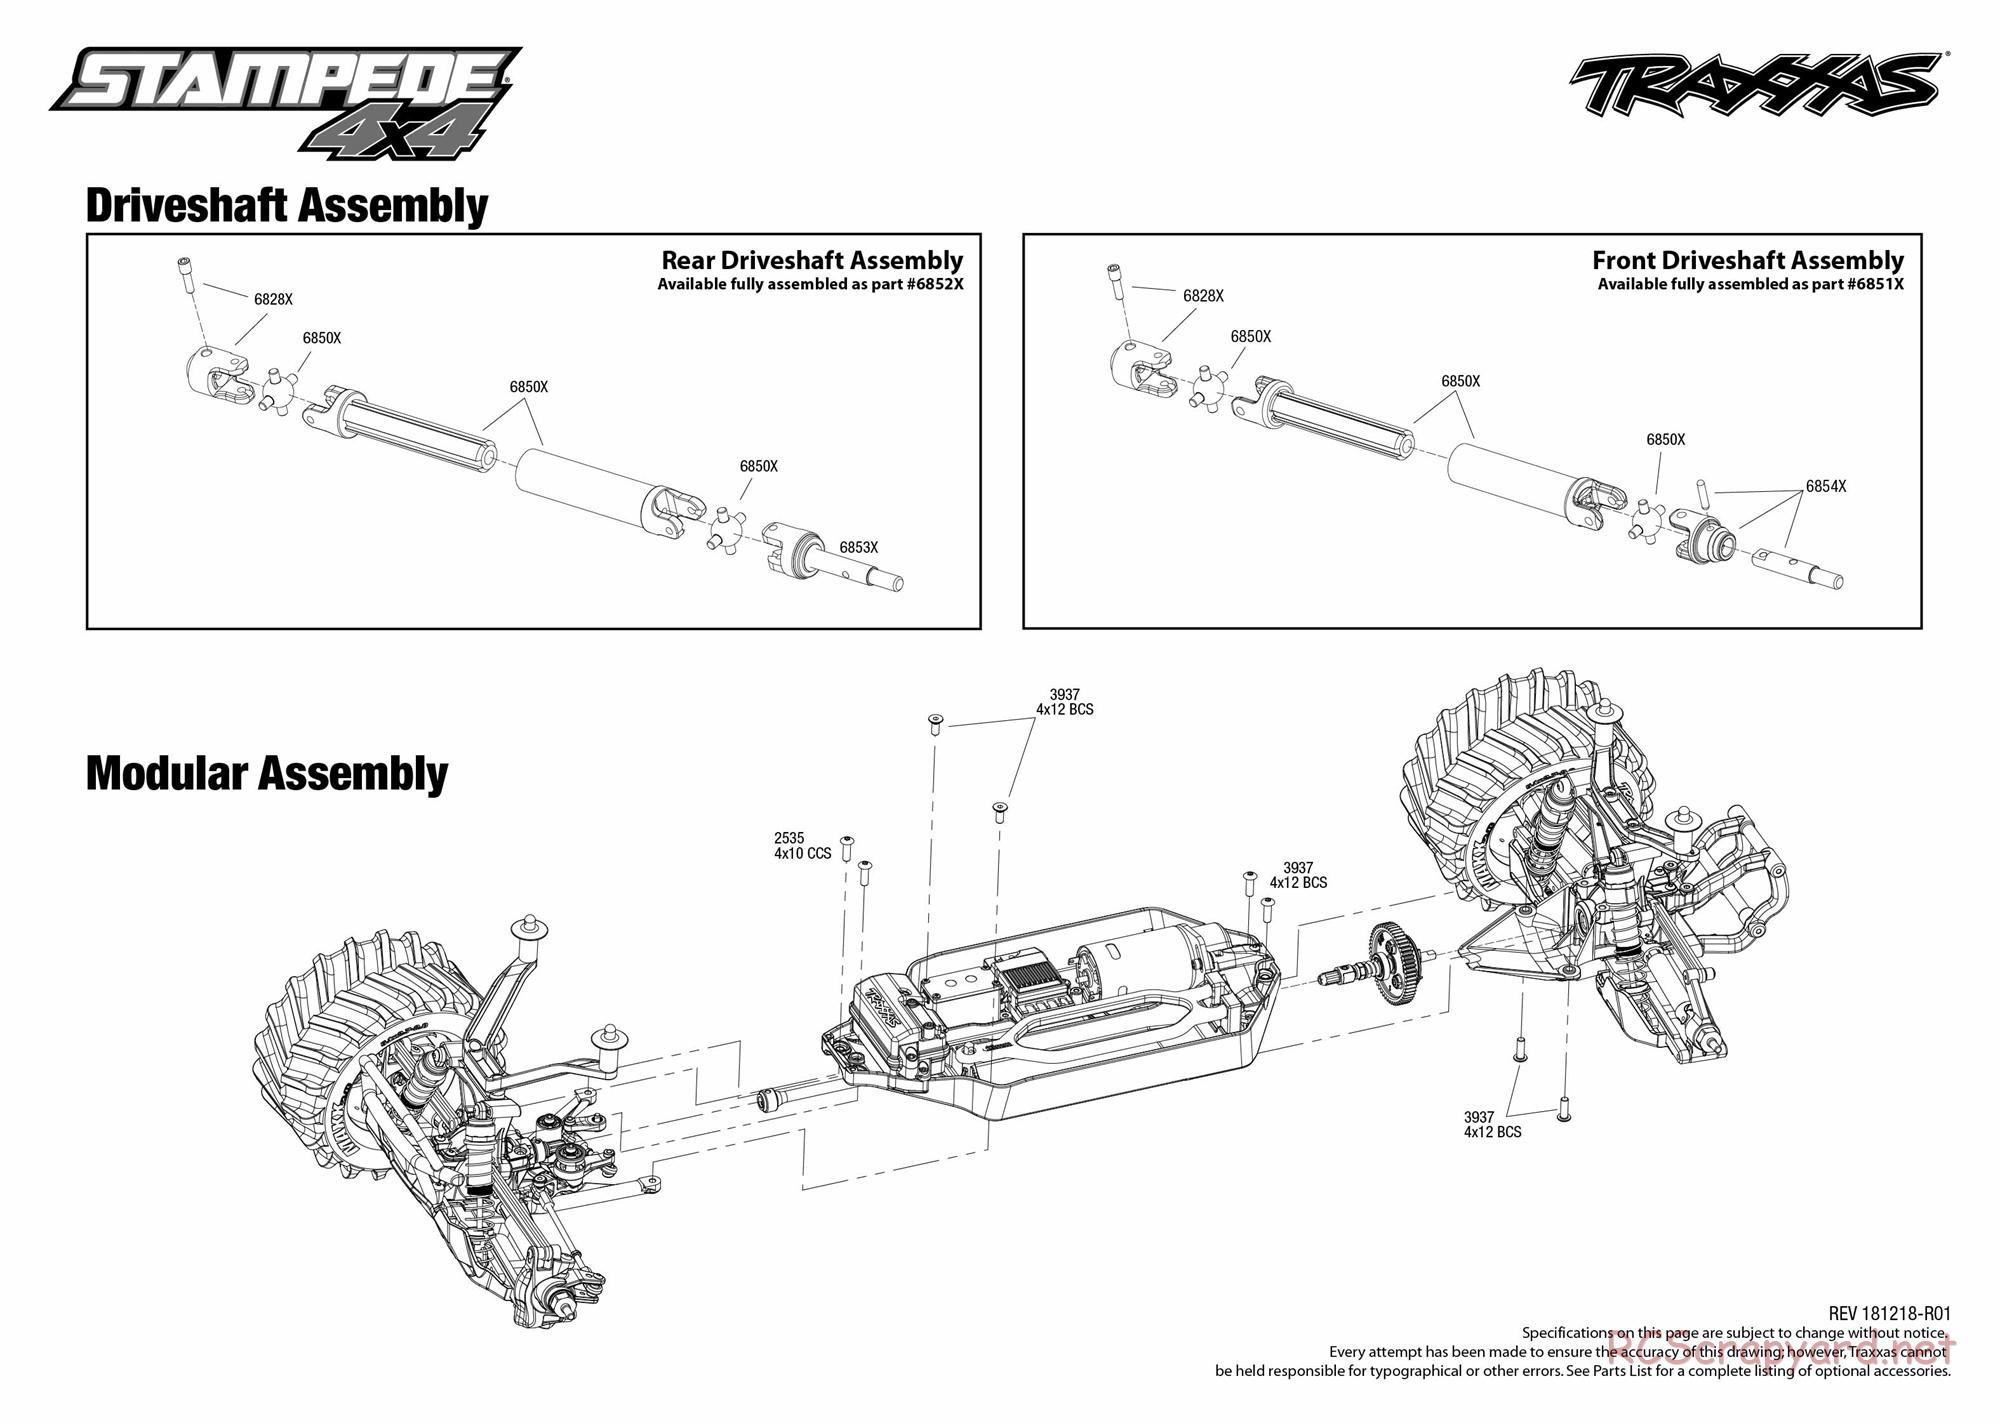 Traxxas - Stampede 4x4 (2019) - Exploded Views - Page 2